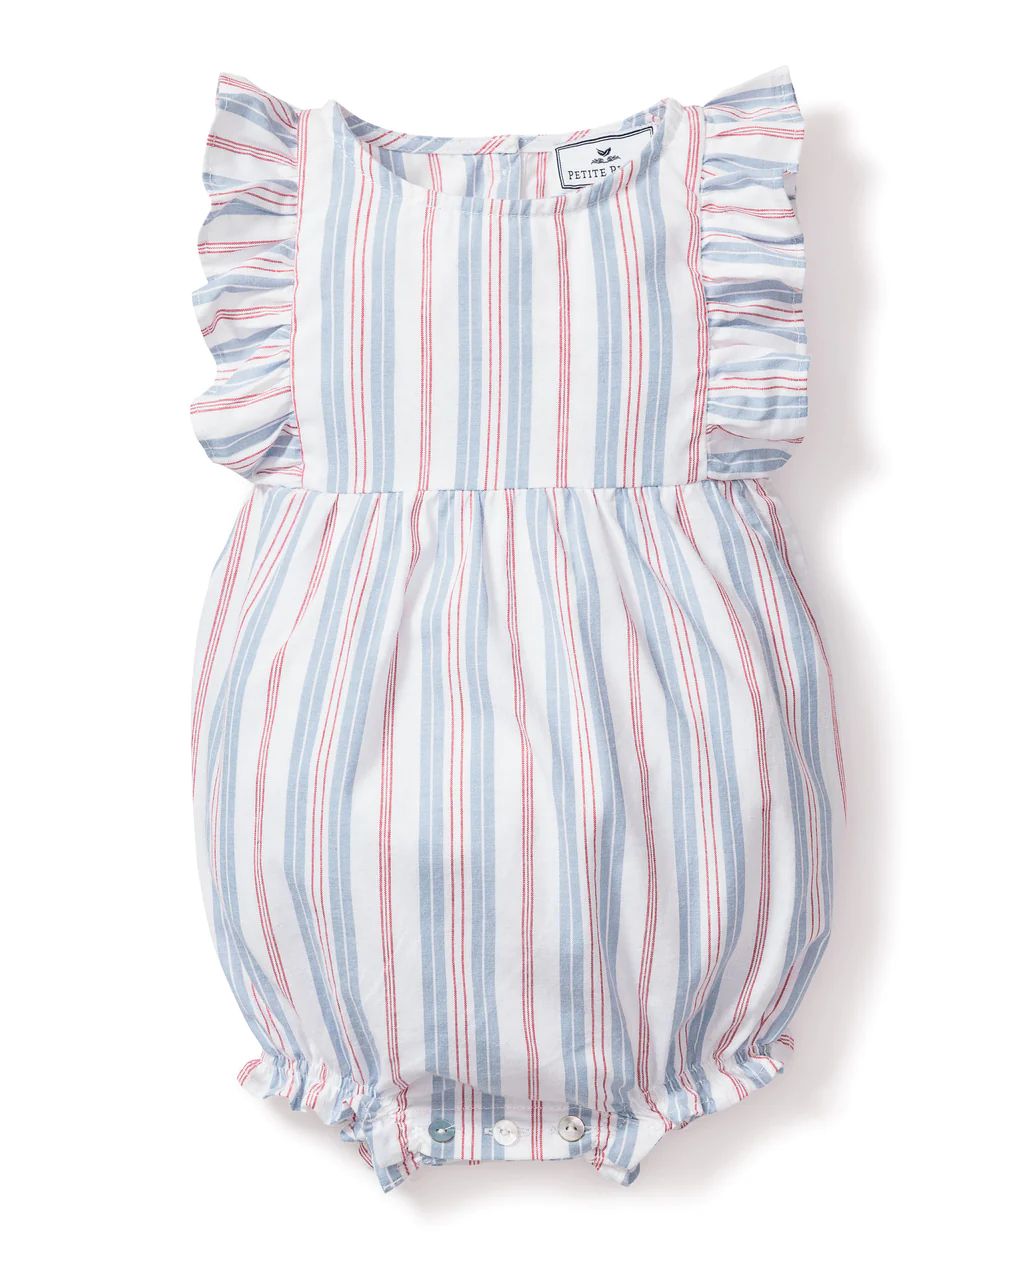 Baby's Twill Ruffled Romper in Vintage French Stripes | Petite Plume